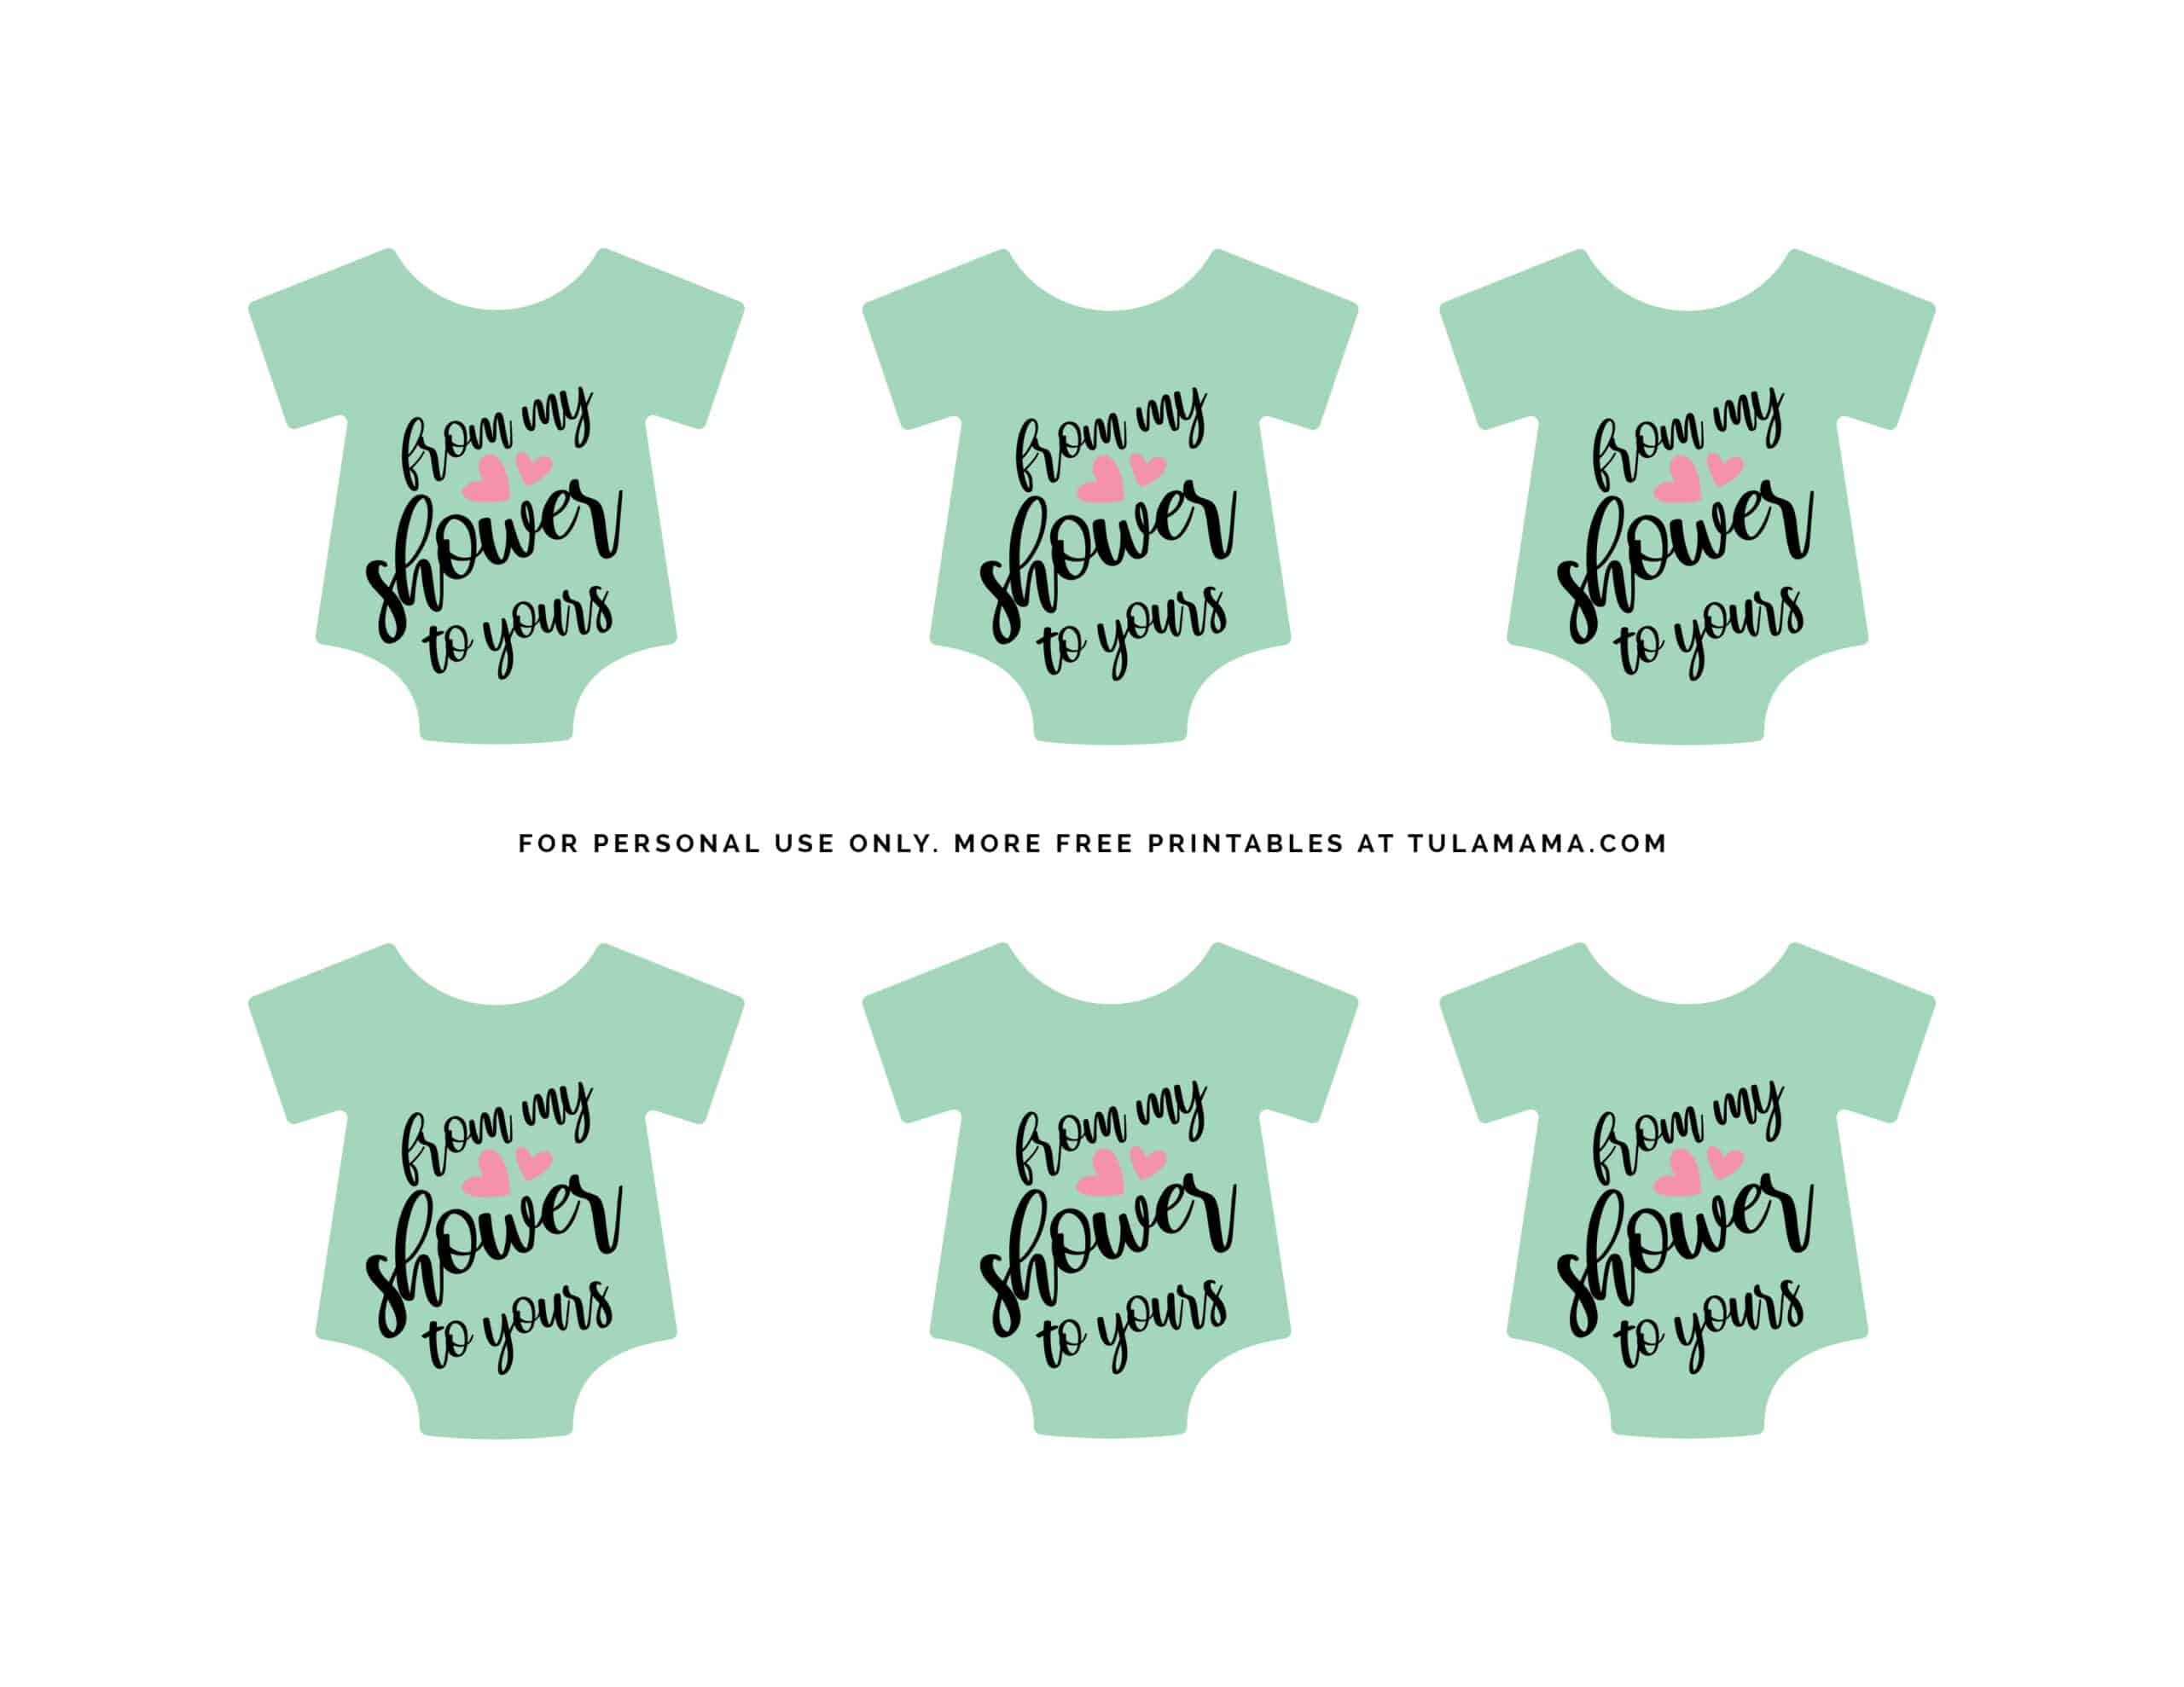 Free Printable &amp;quot;From My Shower To Yours&amp;quot; Gift Tags - Tulamama intended for Free Printable Baby Shower Labels And Tags